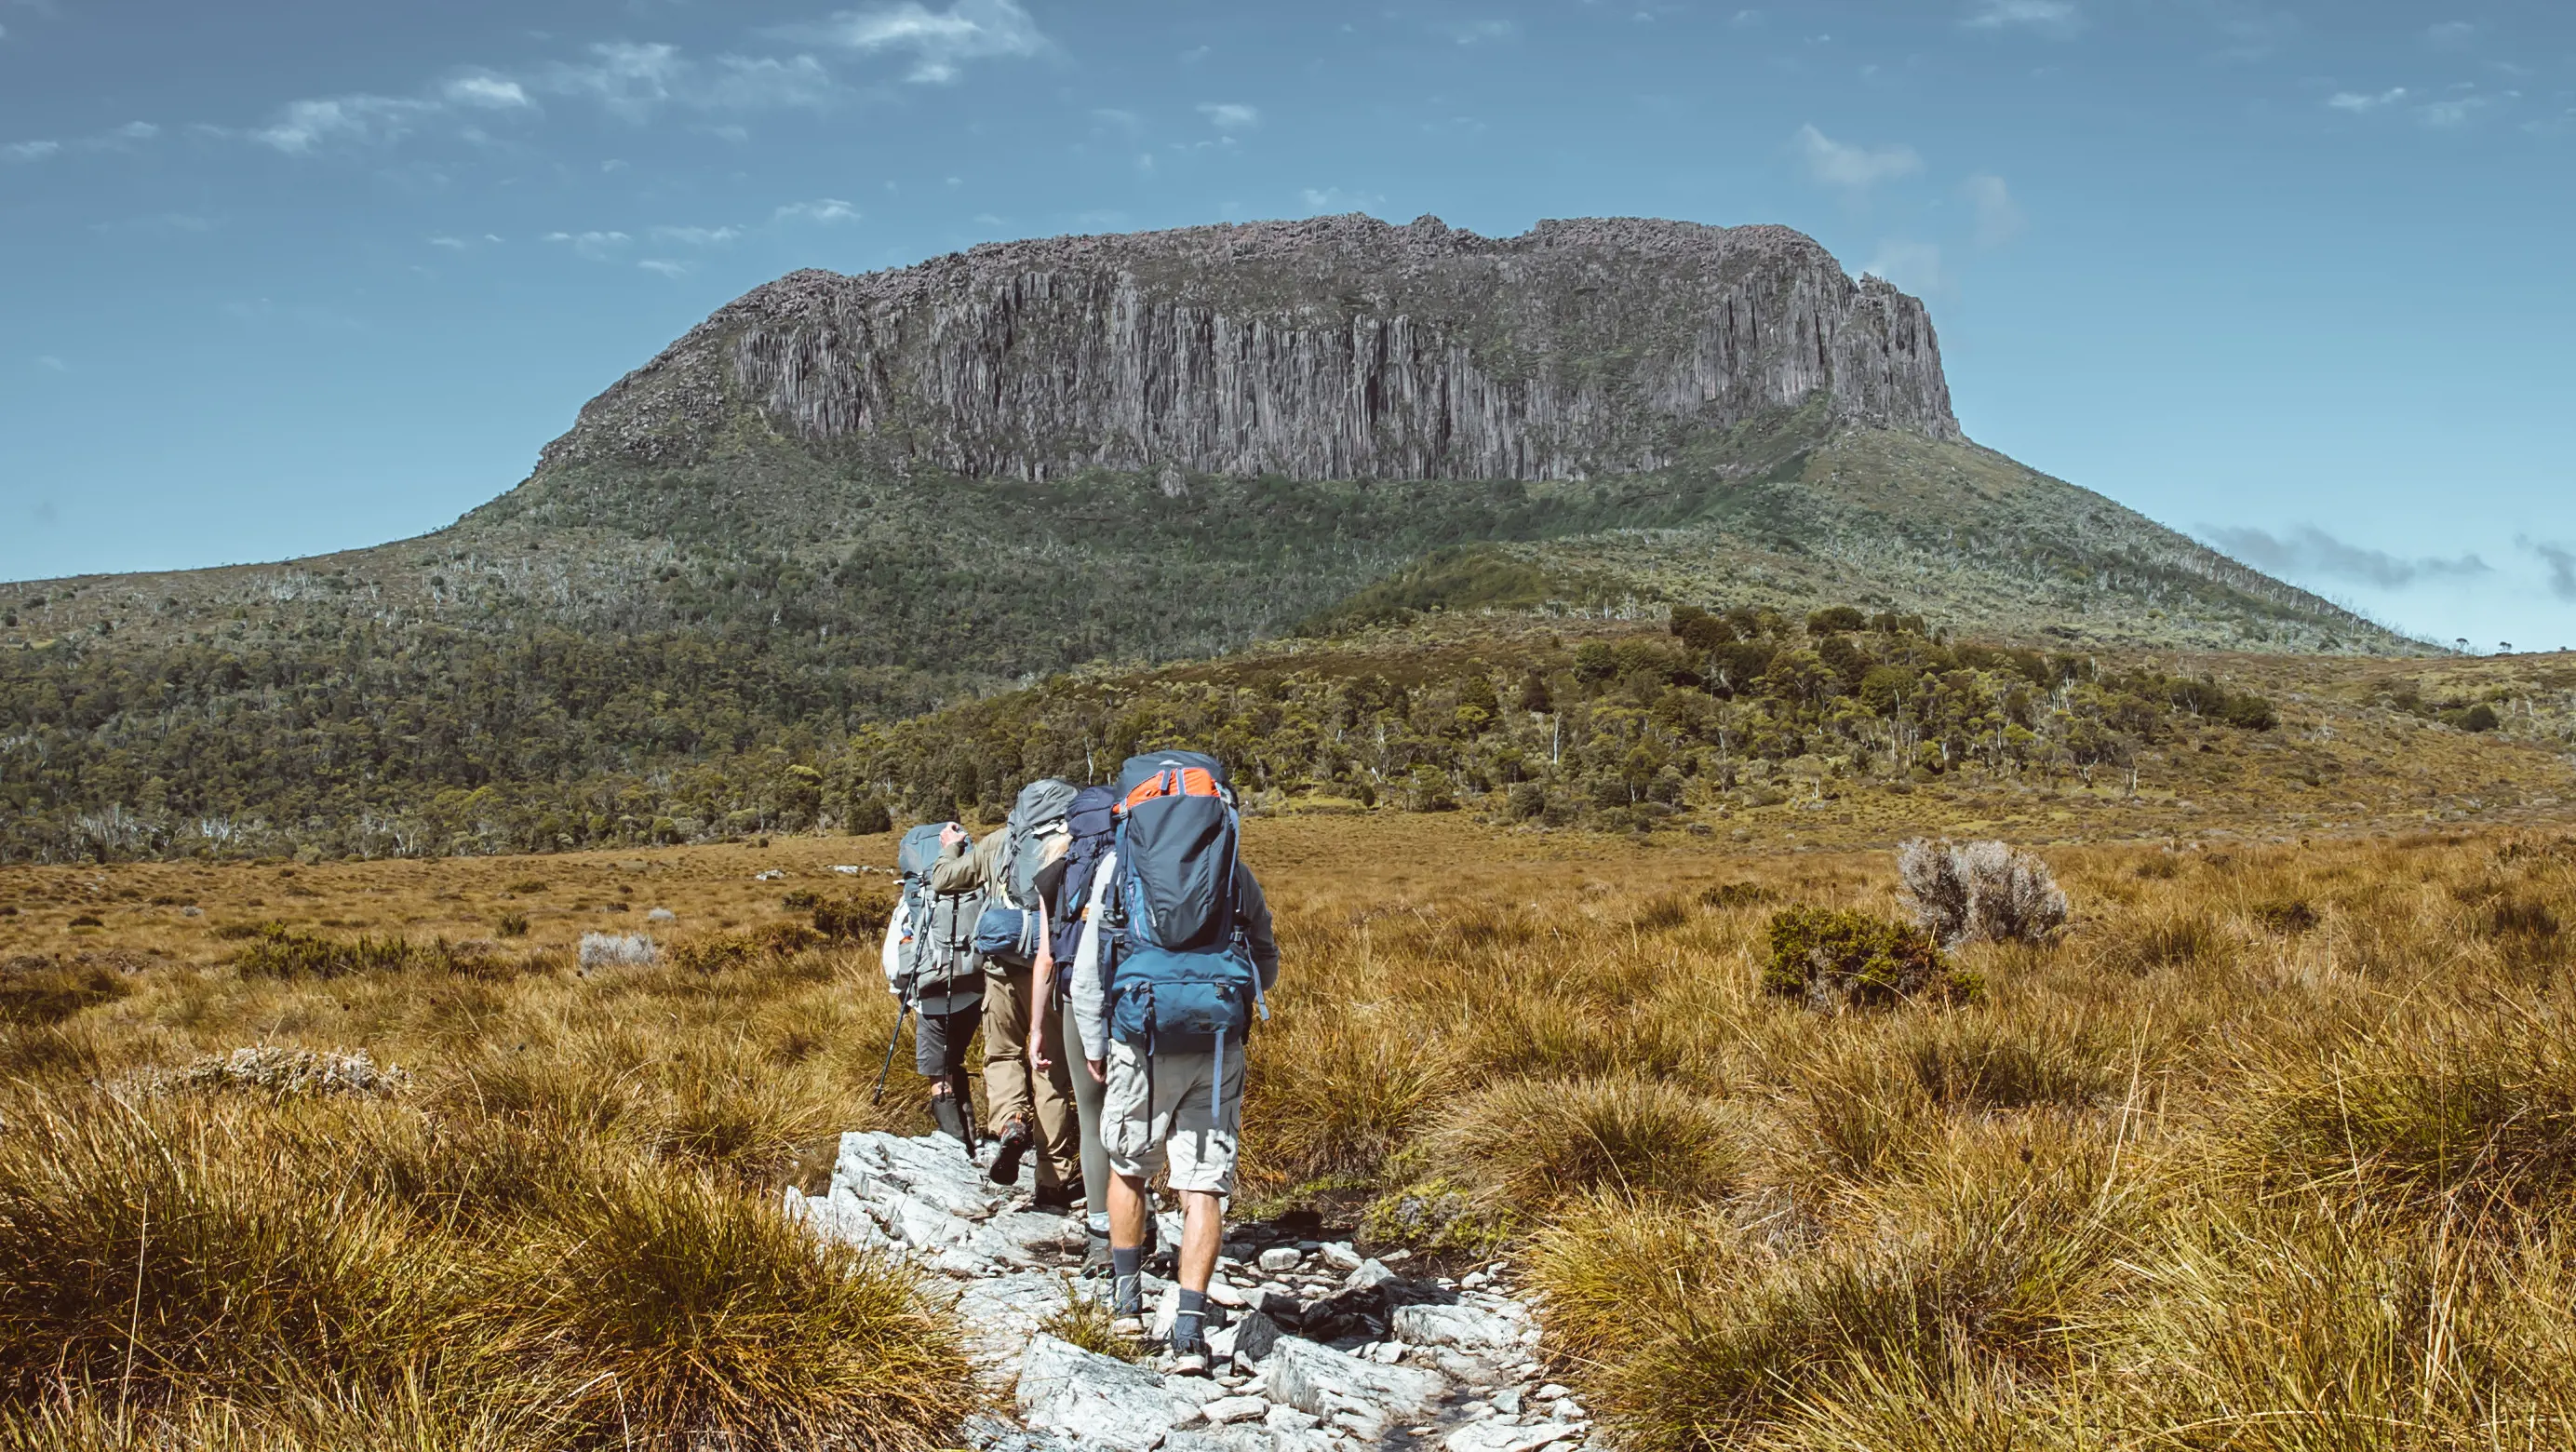 A group of hikers walking the Overland Track at Cradle Mountain.